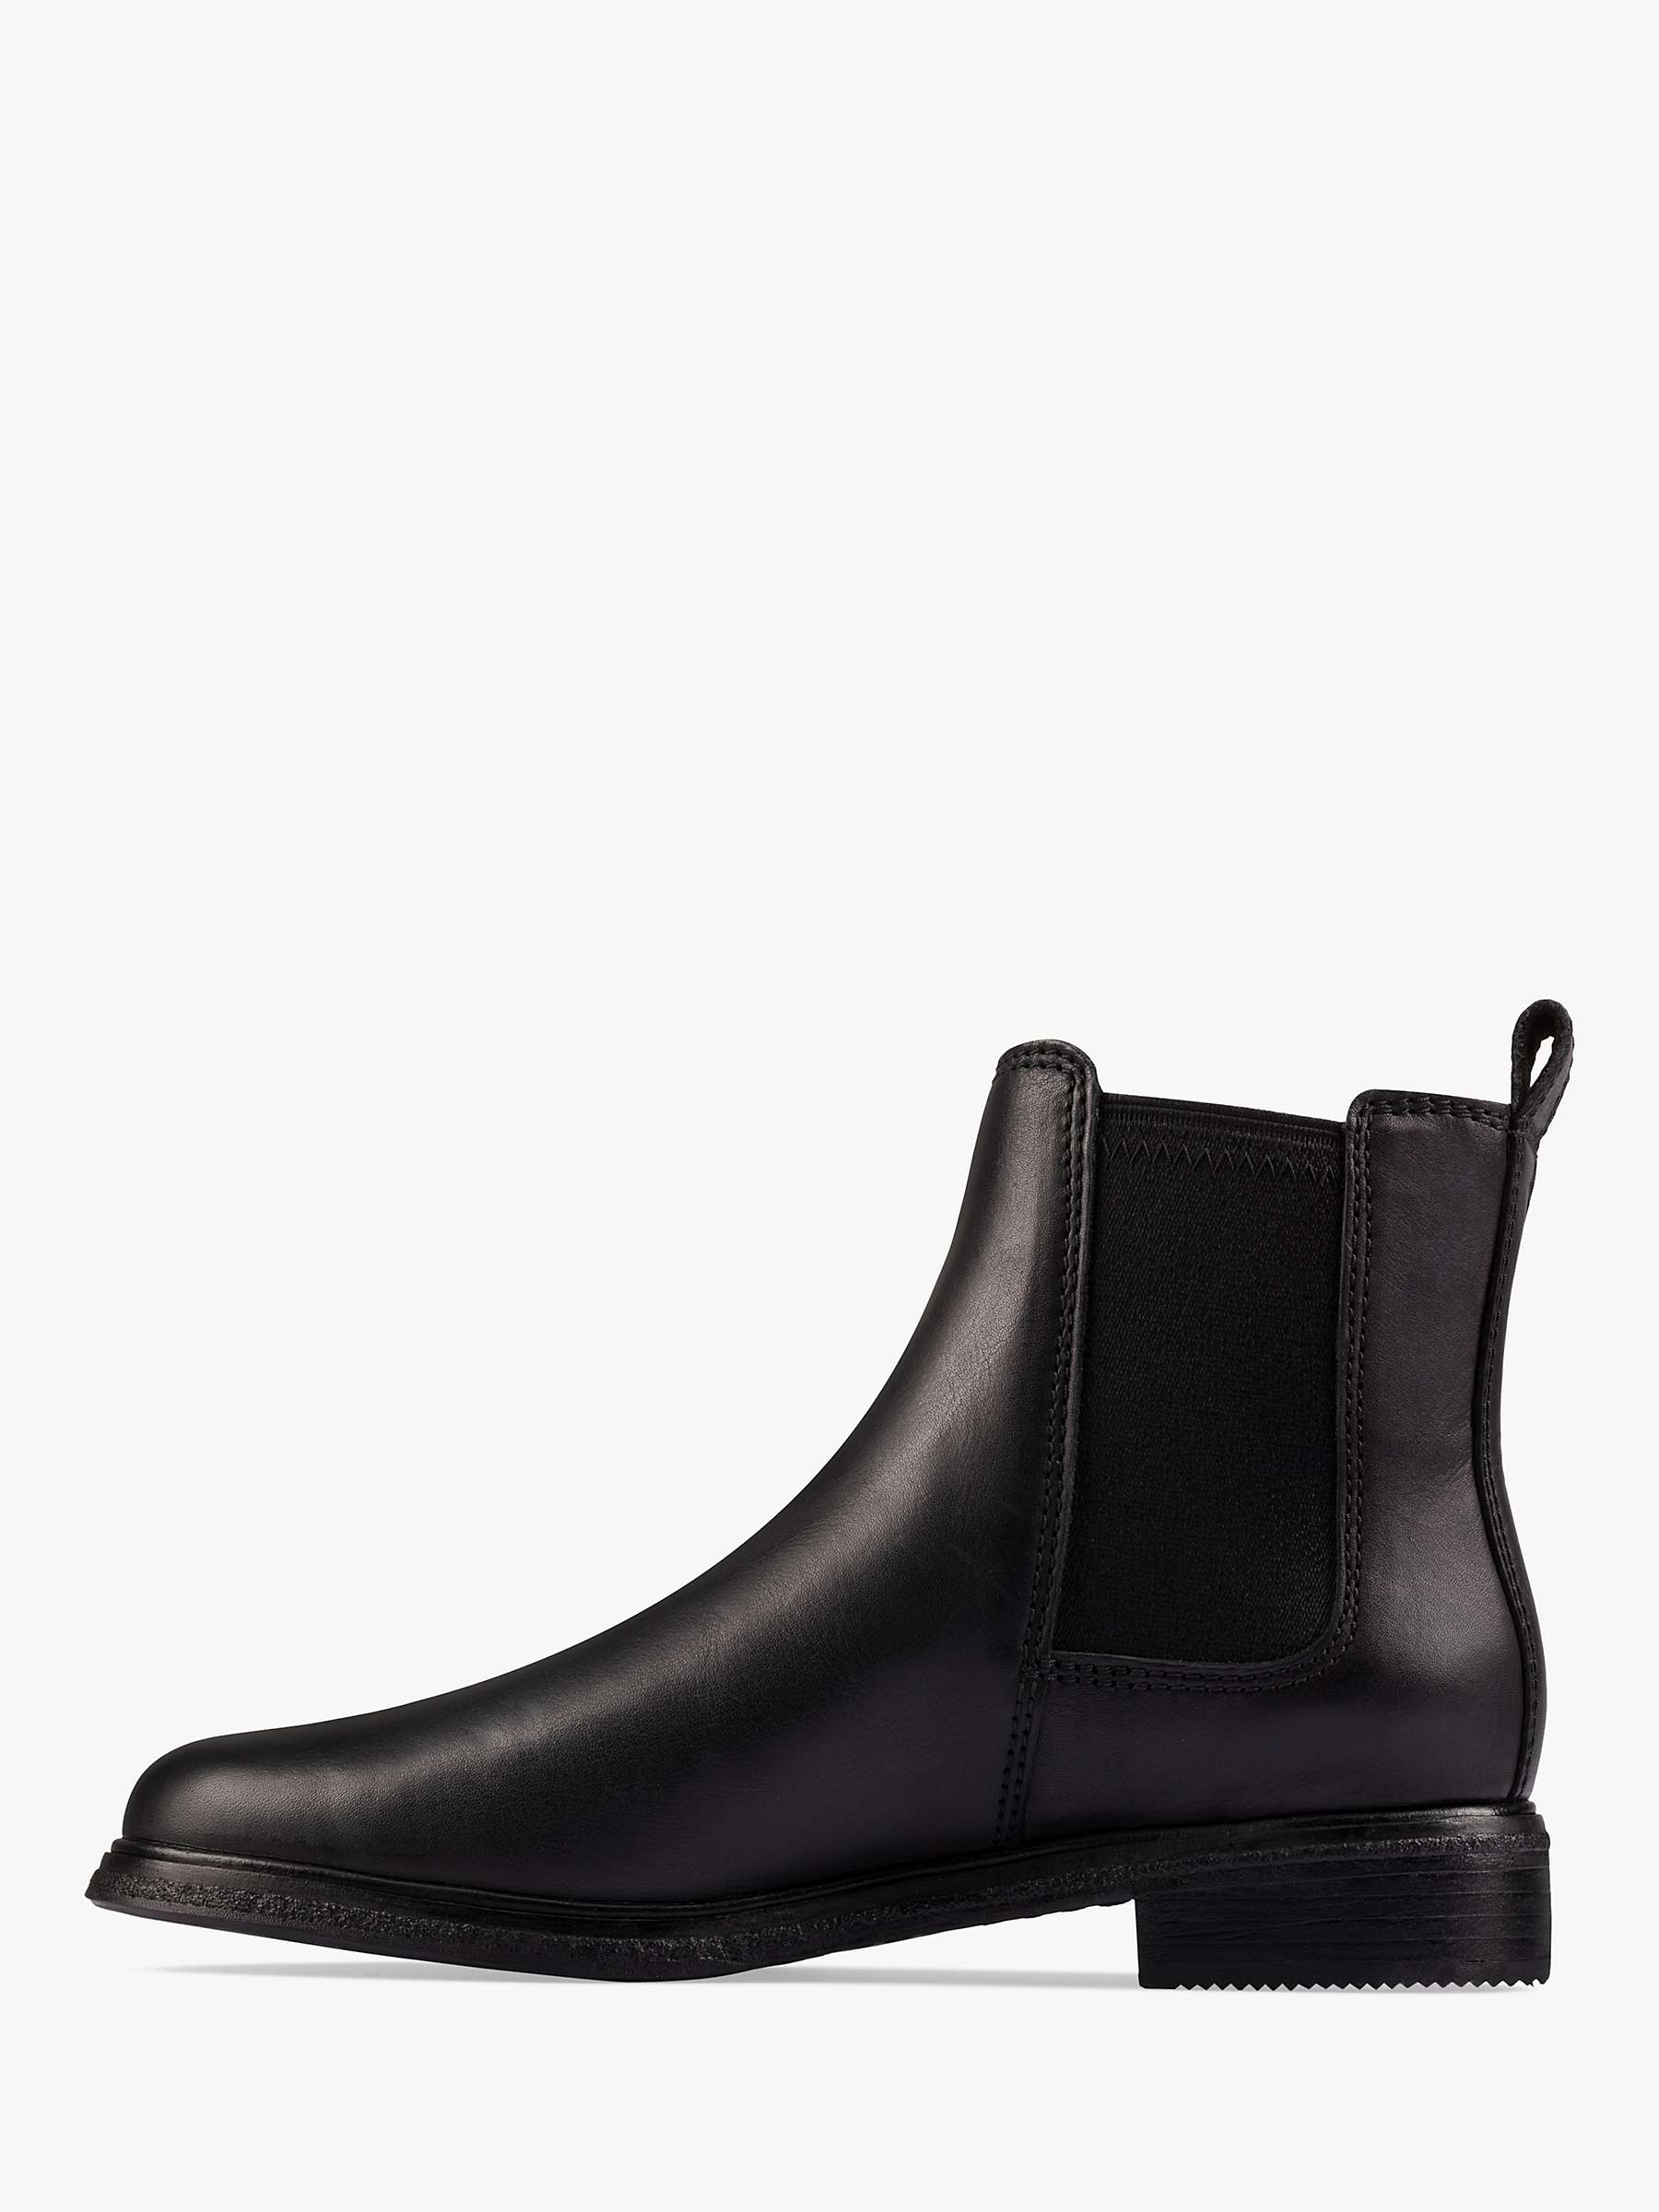 Buy Clarks Clarkdale Leather Chelsea Boots, Black Online at johnlewis.com